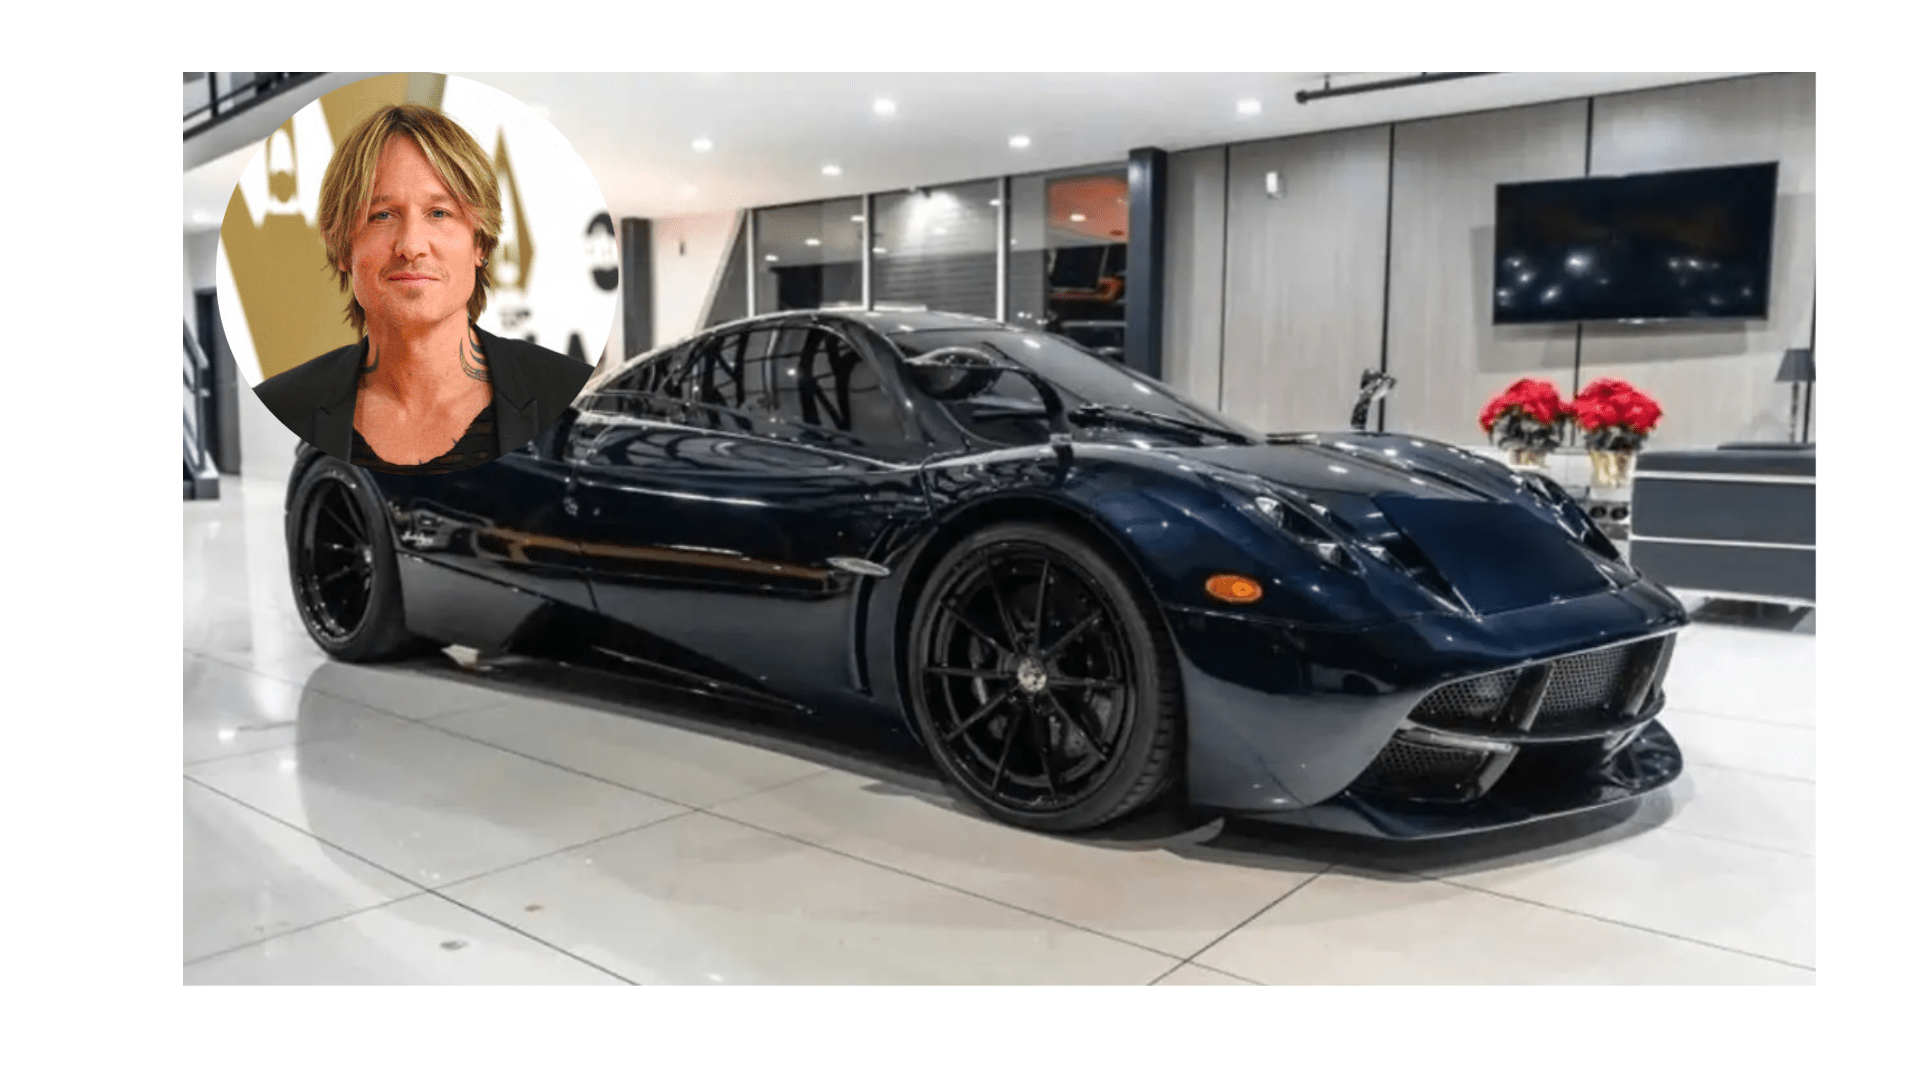 Keith Urban's Car Is Up For Sale But It'll Cost You JJ 101.3 KFDI